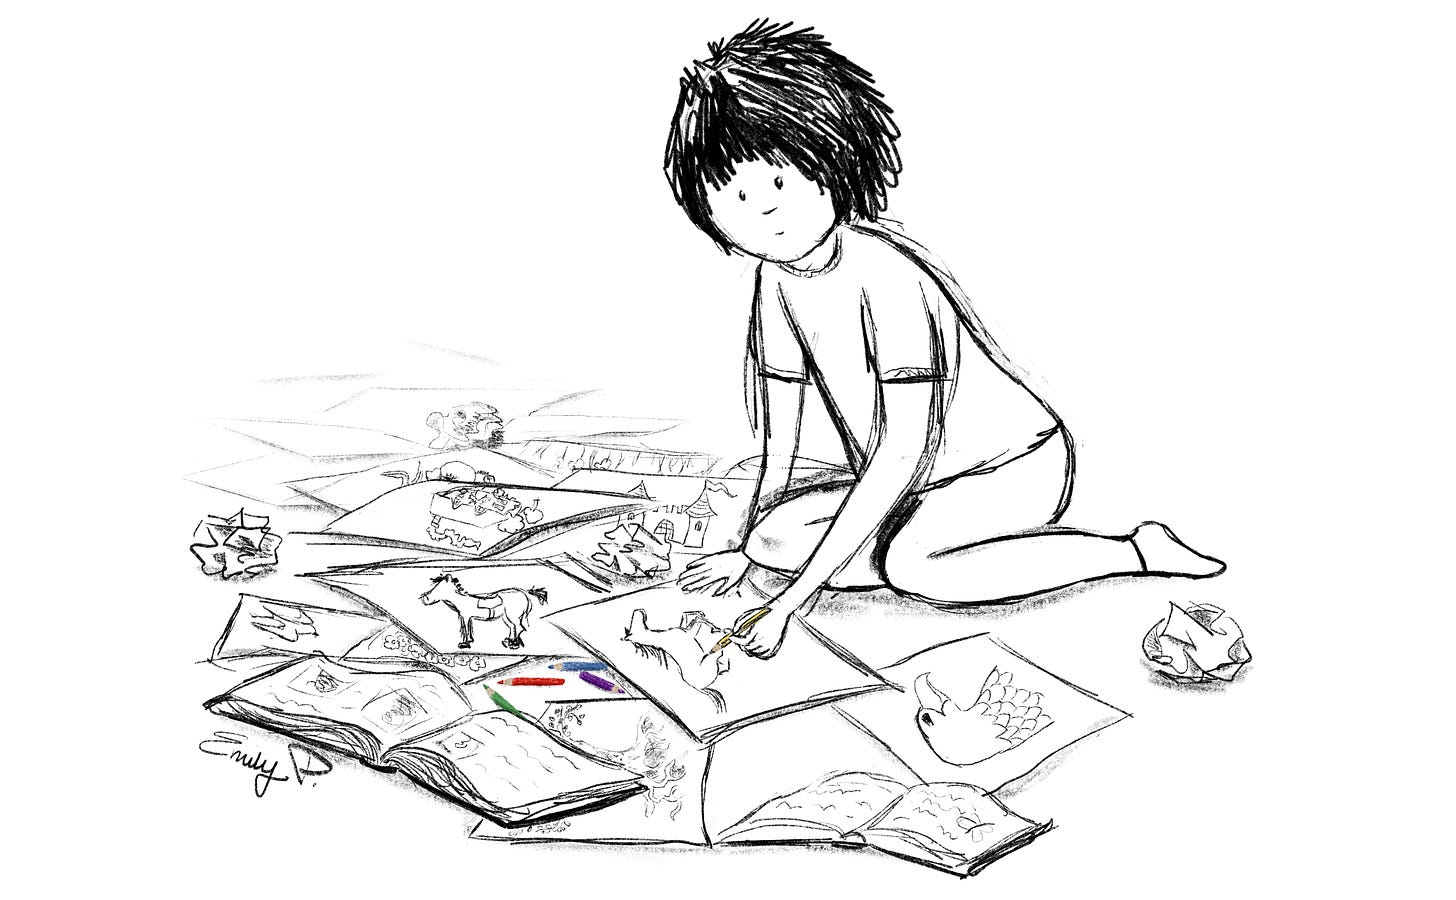 me as a young girl in pygamas and bare feet drawing a horse and surrounded by paper and drawings and books